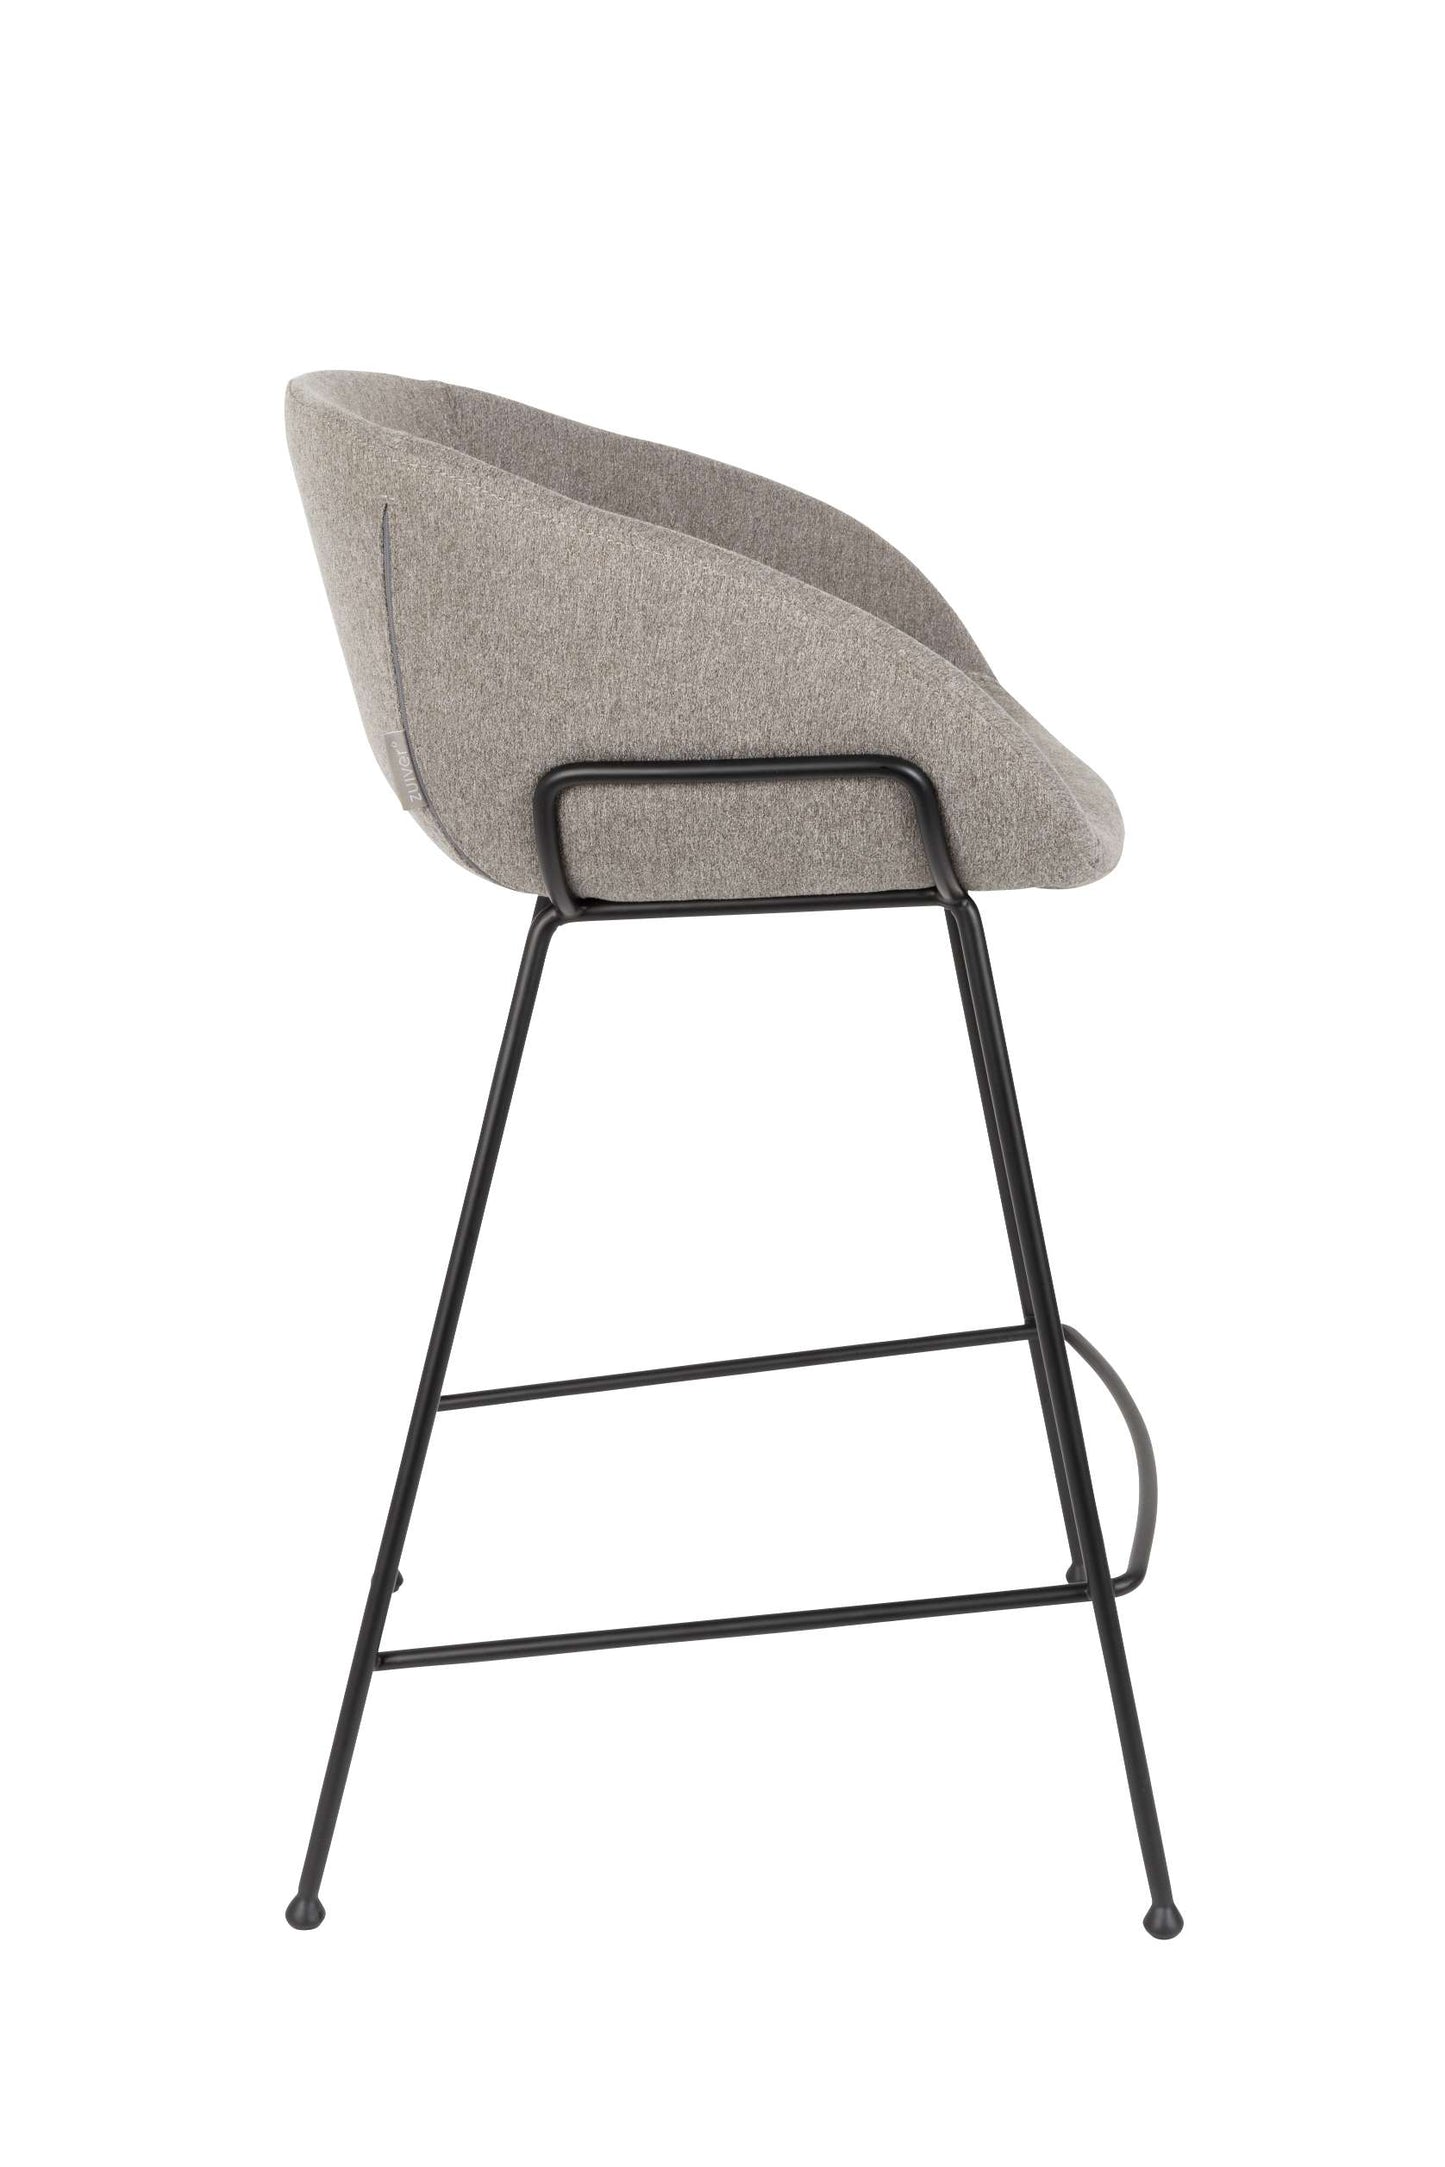 Zuiver | COUNTER STOOL FESTON FAB GREY Default Title